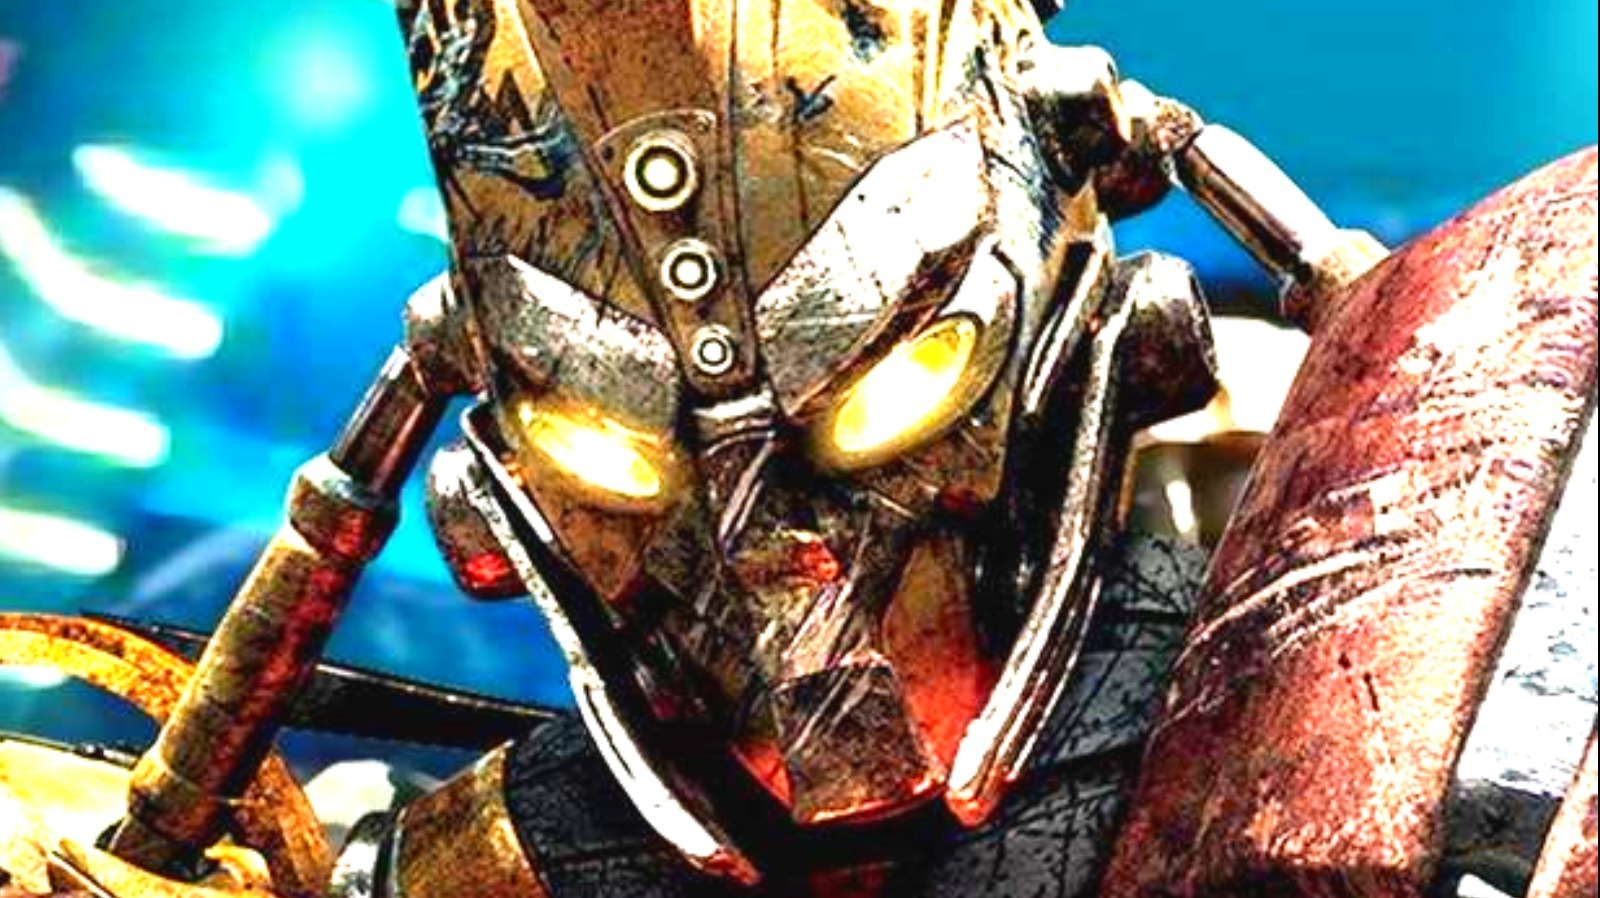 Why Real Steel 2 Hasn't Happened Yet